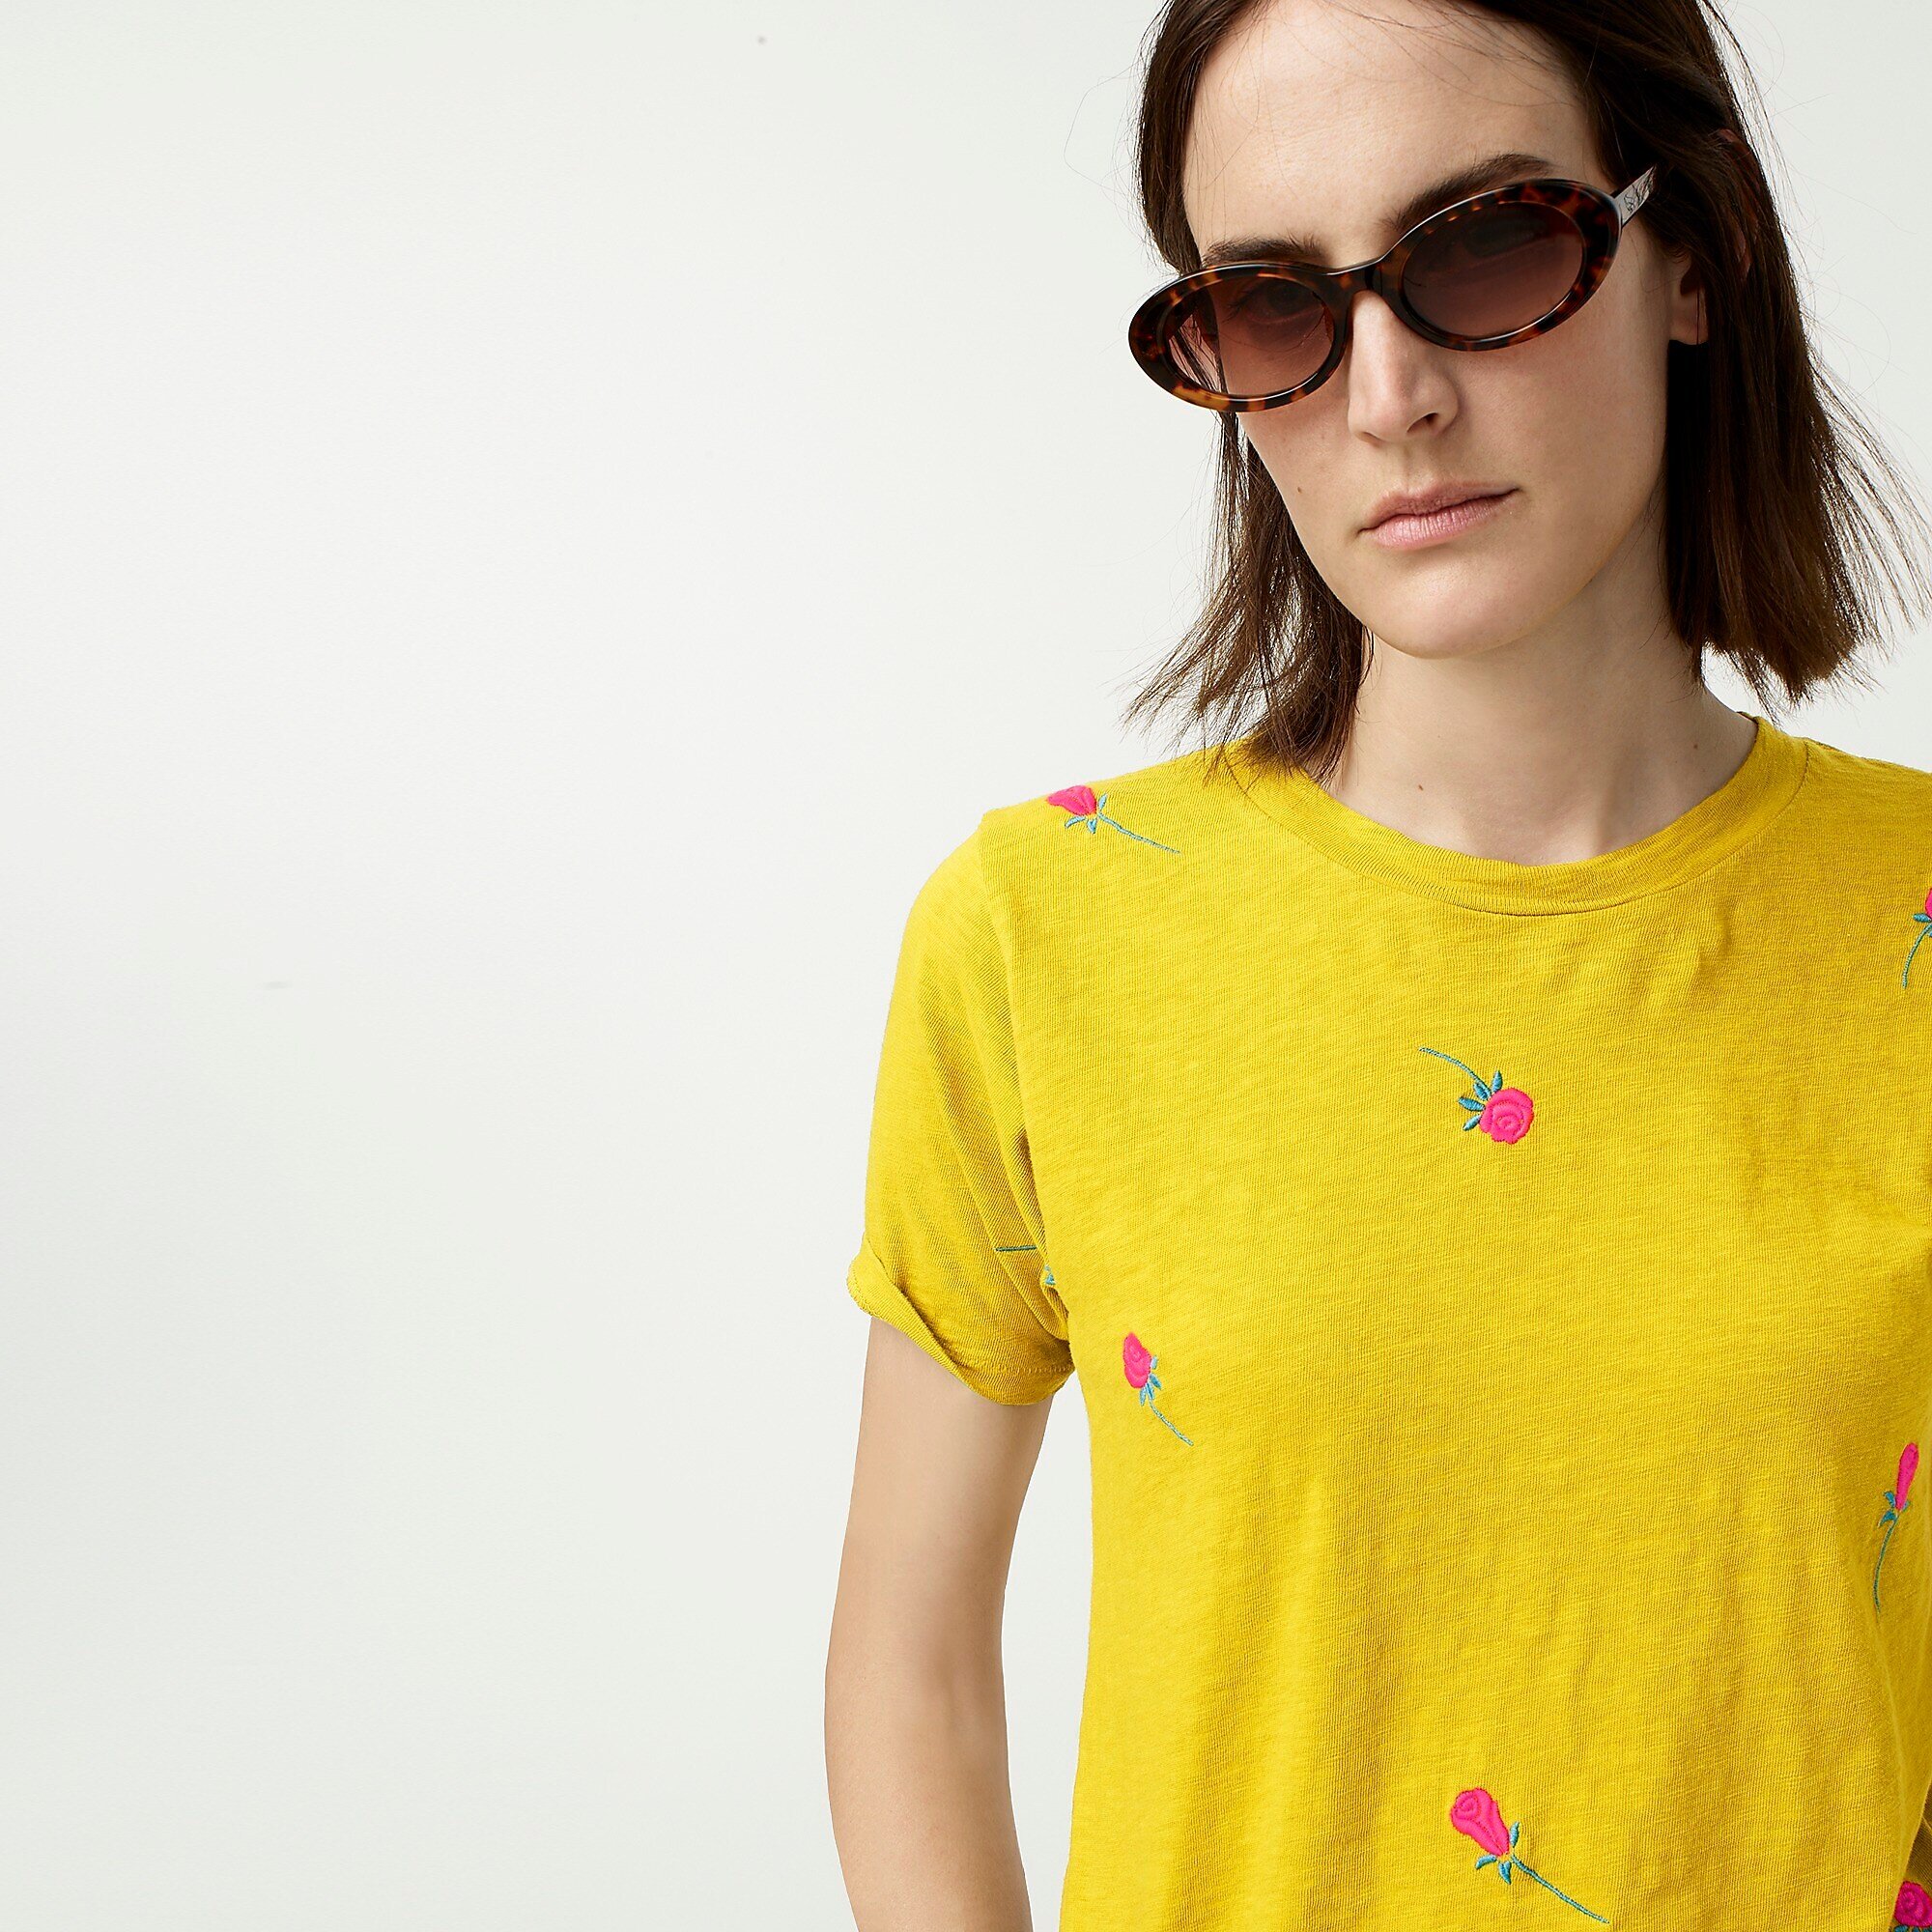 Camilla Atkins, CATKINS DESIGN for J. Crew, Summer 2019 Roses embroidered tee shirt.jpeg